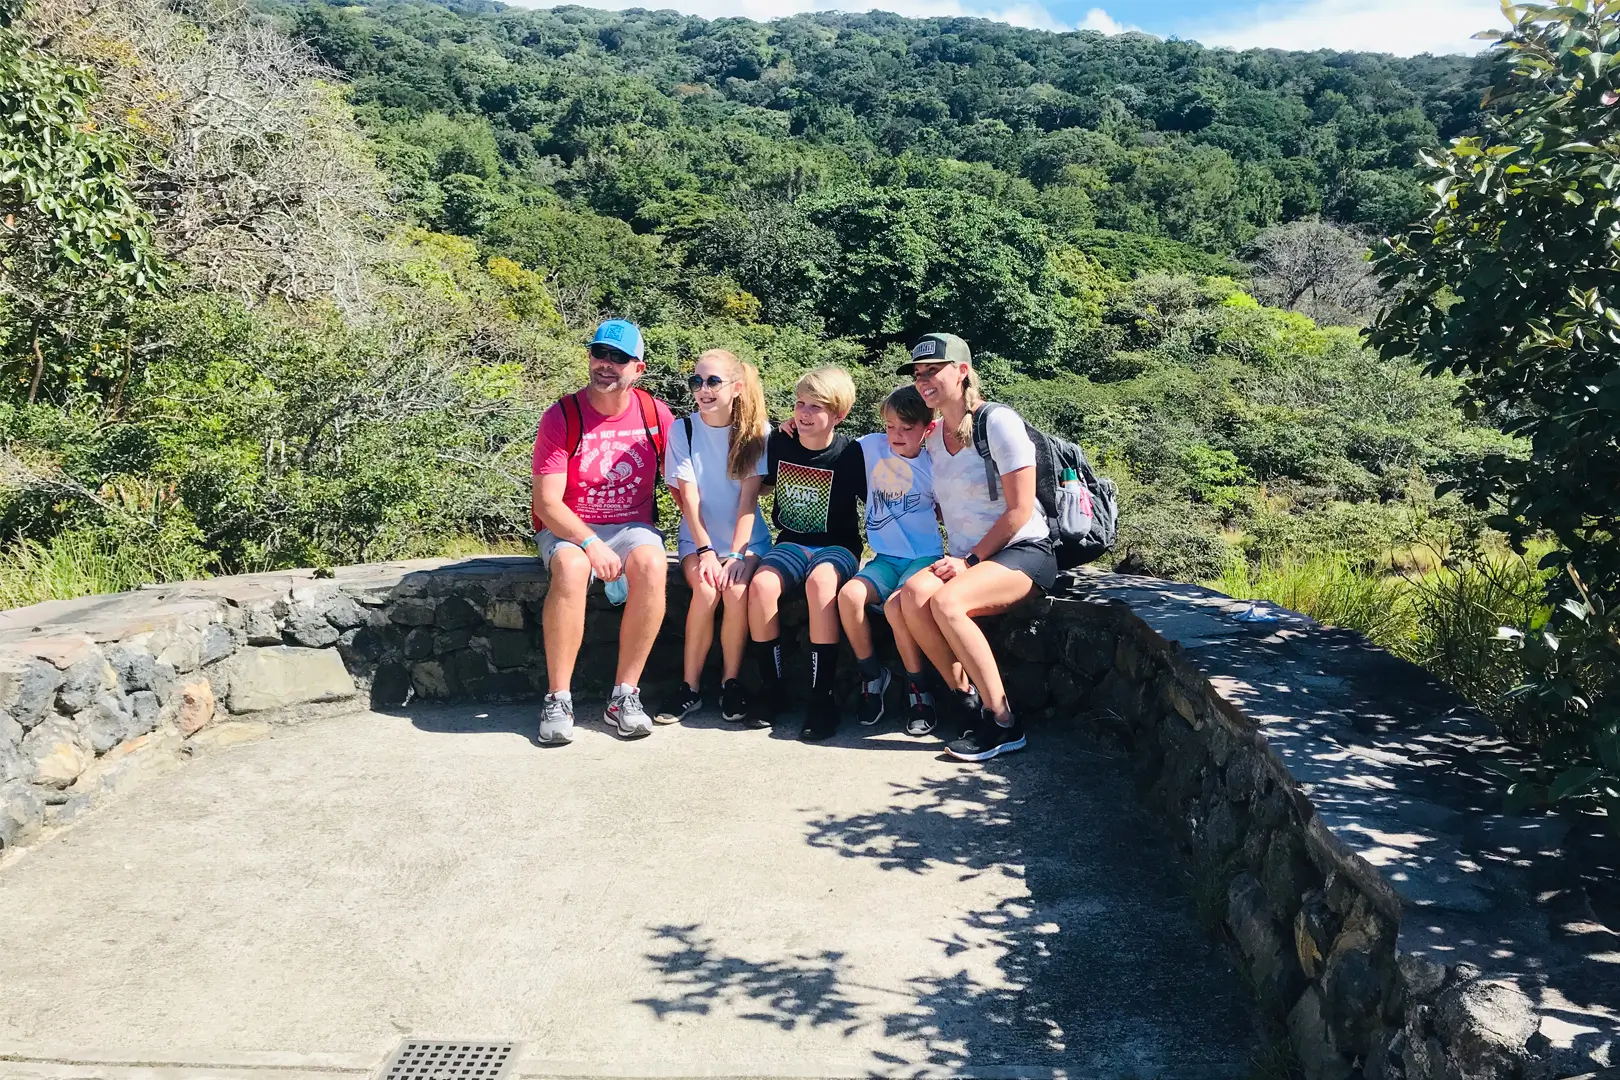 Capturing priceless memories with the stunning Rincon de la Vieja Volcano as a backdrop. Cherishing this special moment with family amidst the beauty of nature on a volcanic hike.